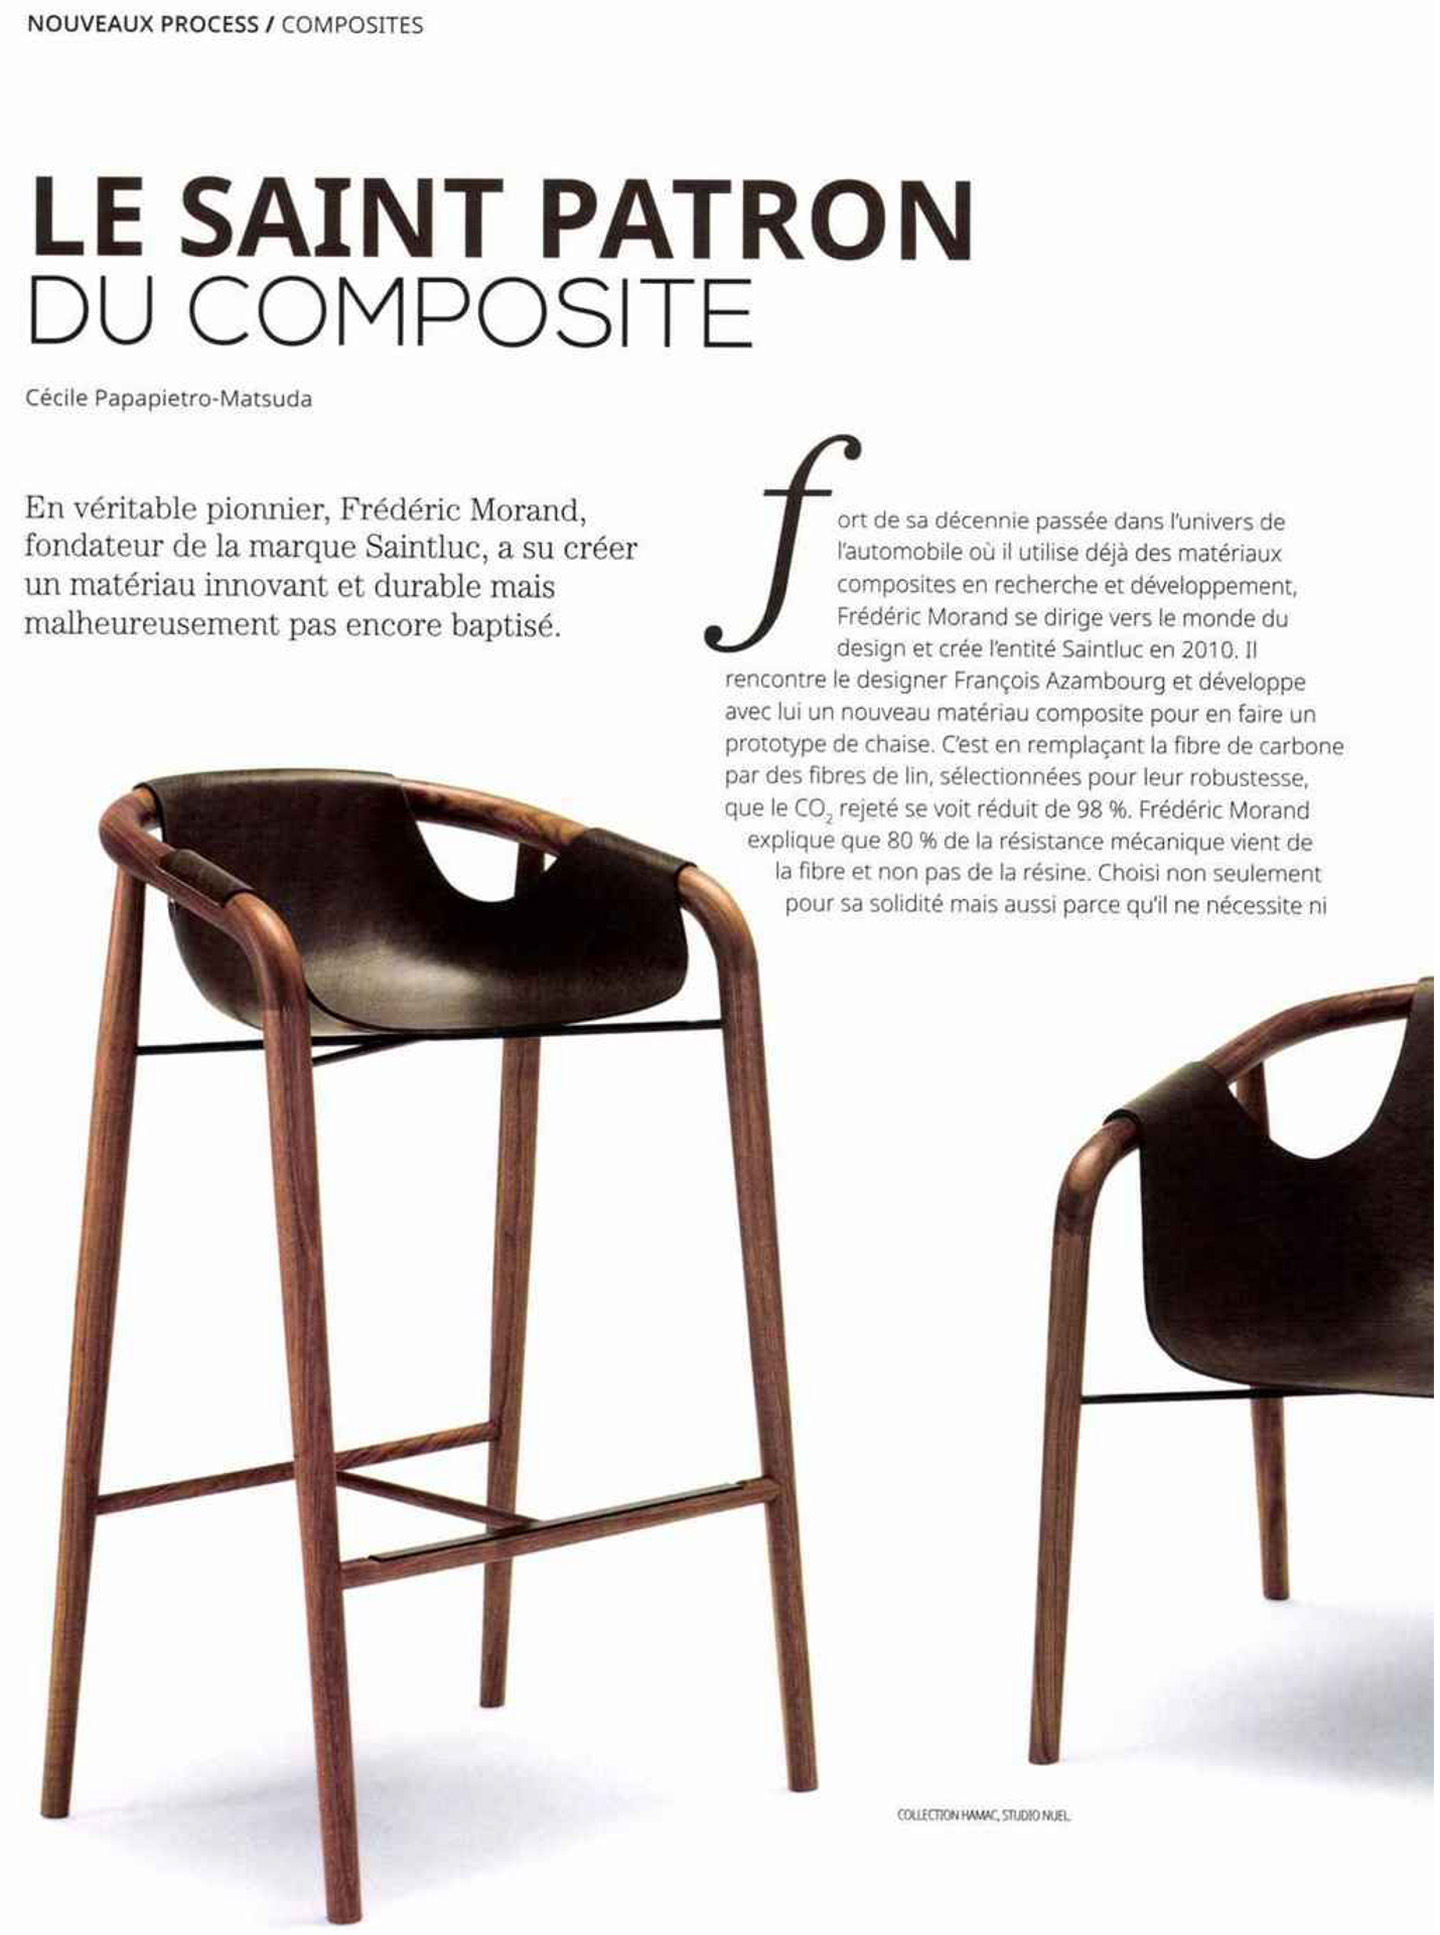 article on the collaboration between french interior designer jean-philippe nuel and saintluc for the creation of a range of seats made from linen fibers, object design